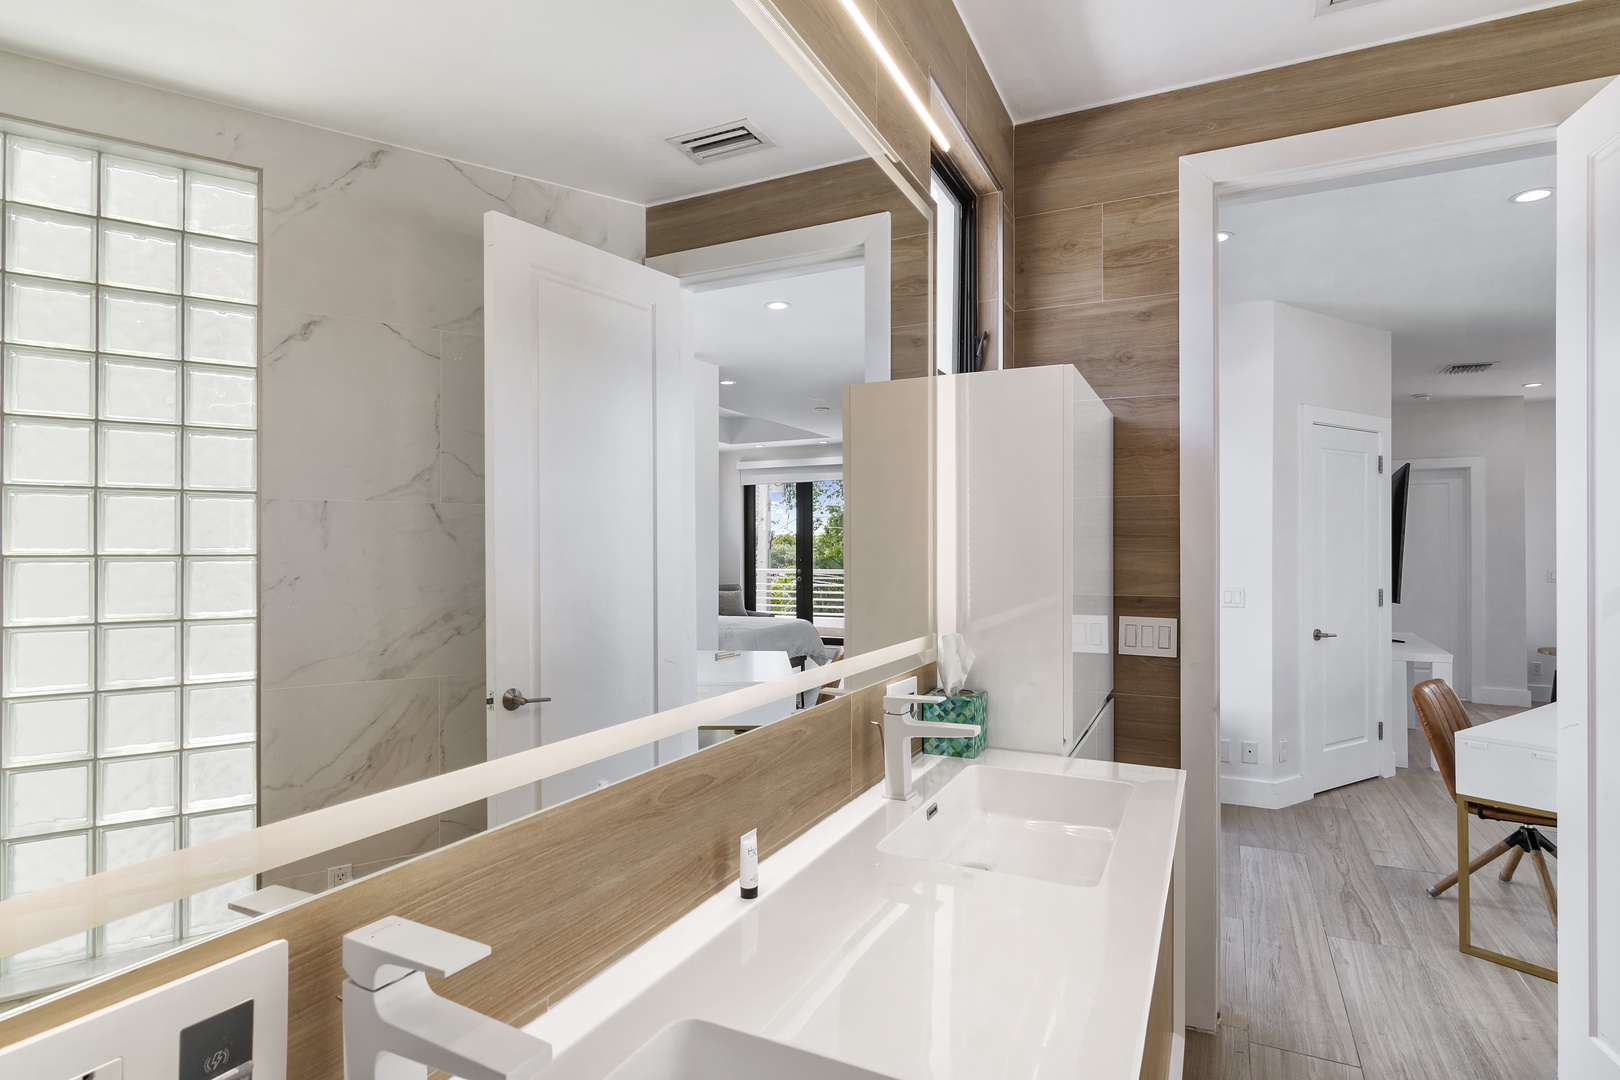 The king ensuite features a large vanity, glass shower, & luxurious soaking tub